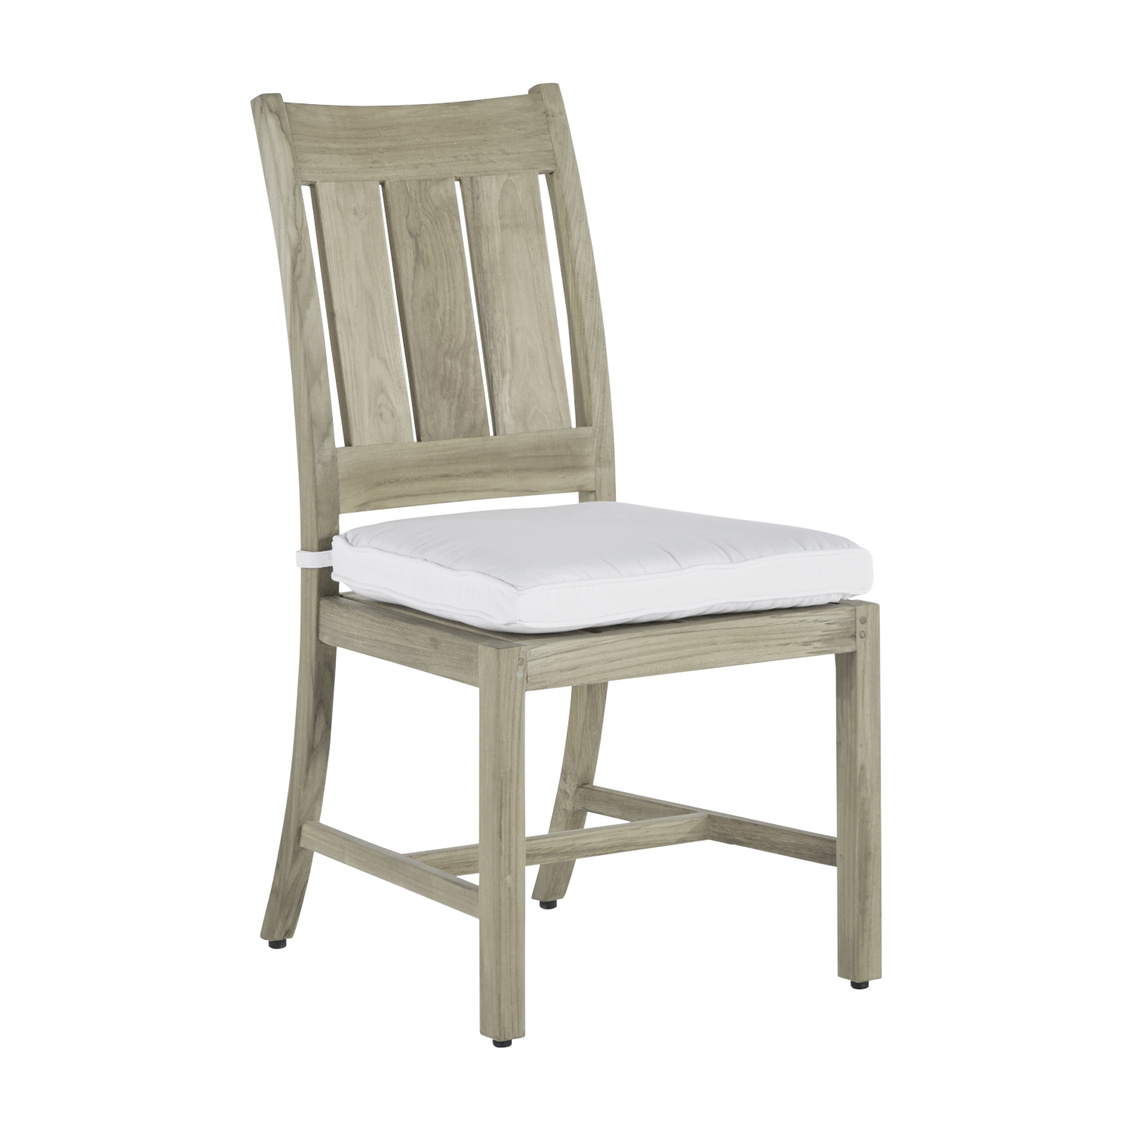 croquet teak side chair in oyster teak – frame only product image